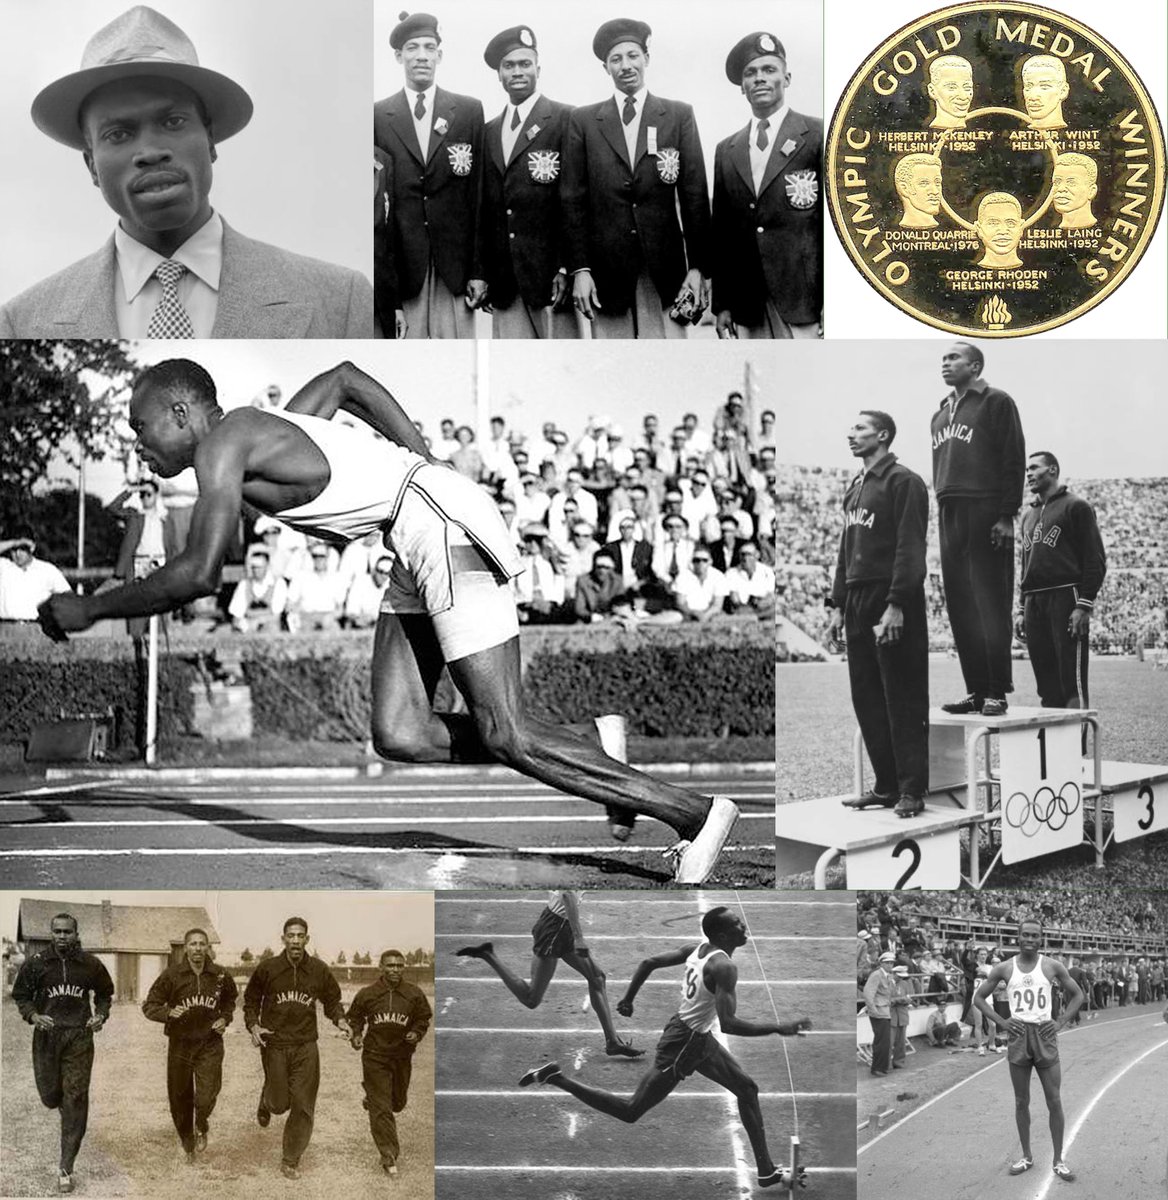 George Rhoden, Jamaica’s 2nd Olympic Gold Medallist, born 94 yrs ago today on 13 Dec 1926, in Kingston. 1950 Eskilstuna, Sweden, he set new 400m world record. 1952 Helsinki, Finland 2 Olympic Golds; 400m & 4x400m. 

Lest we forget: Today’s stars stand on the shoulders of giants. https://t.co/vhdSB8joFf